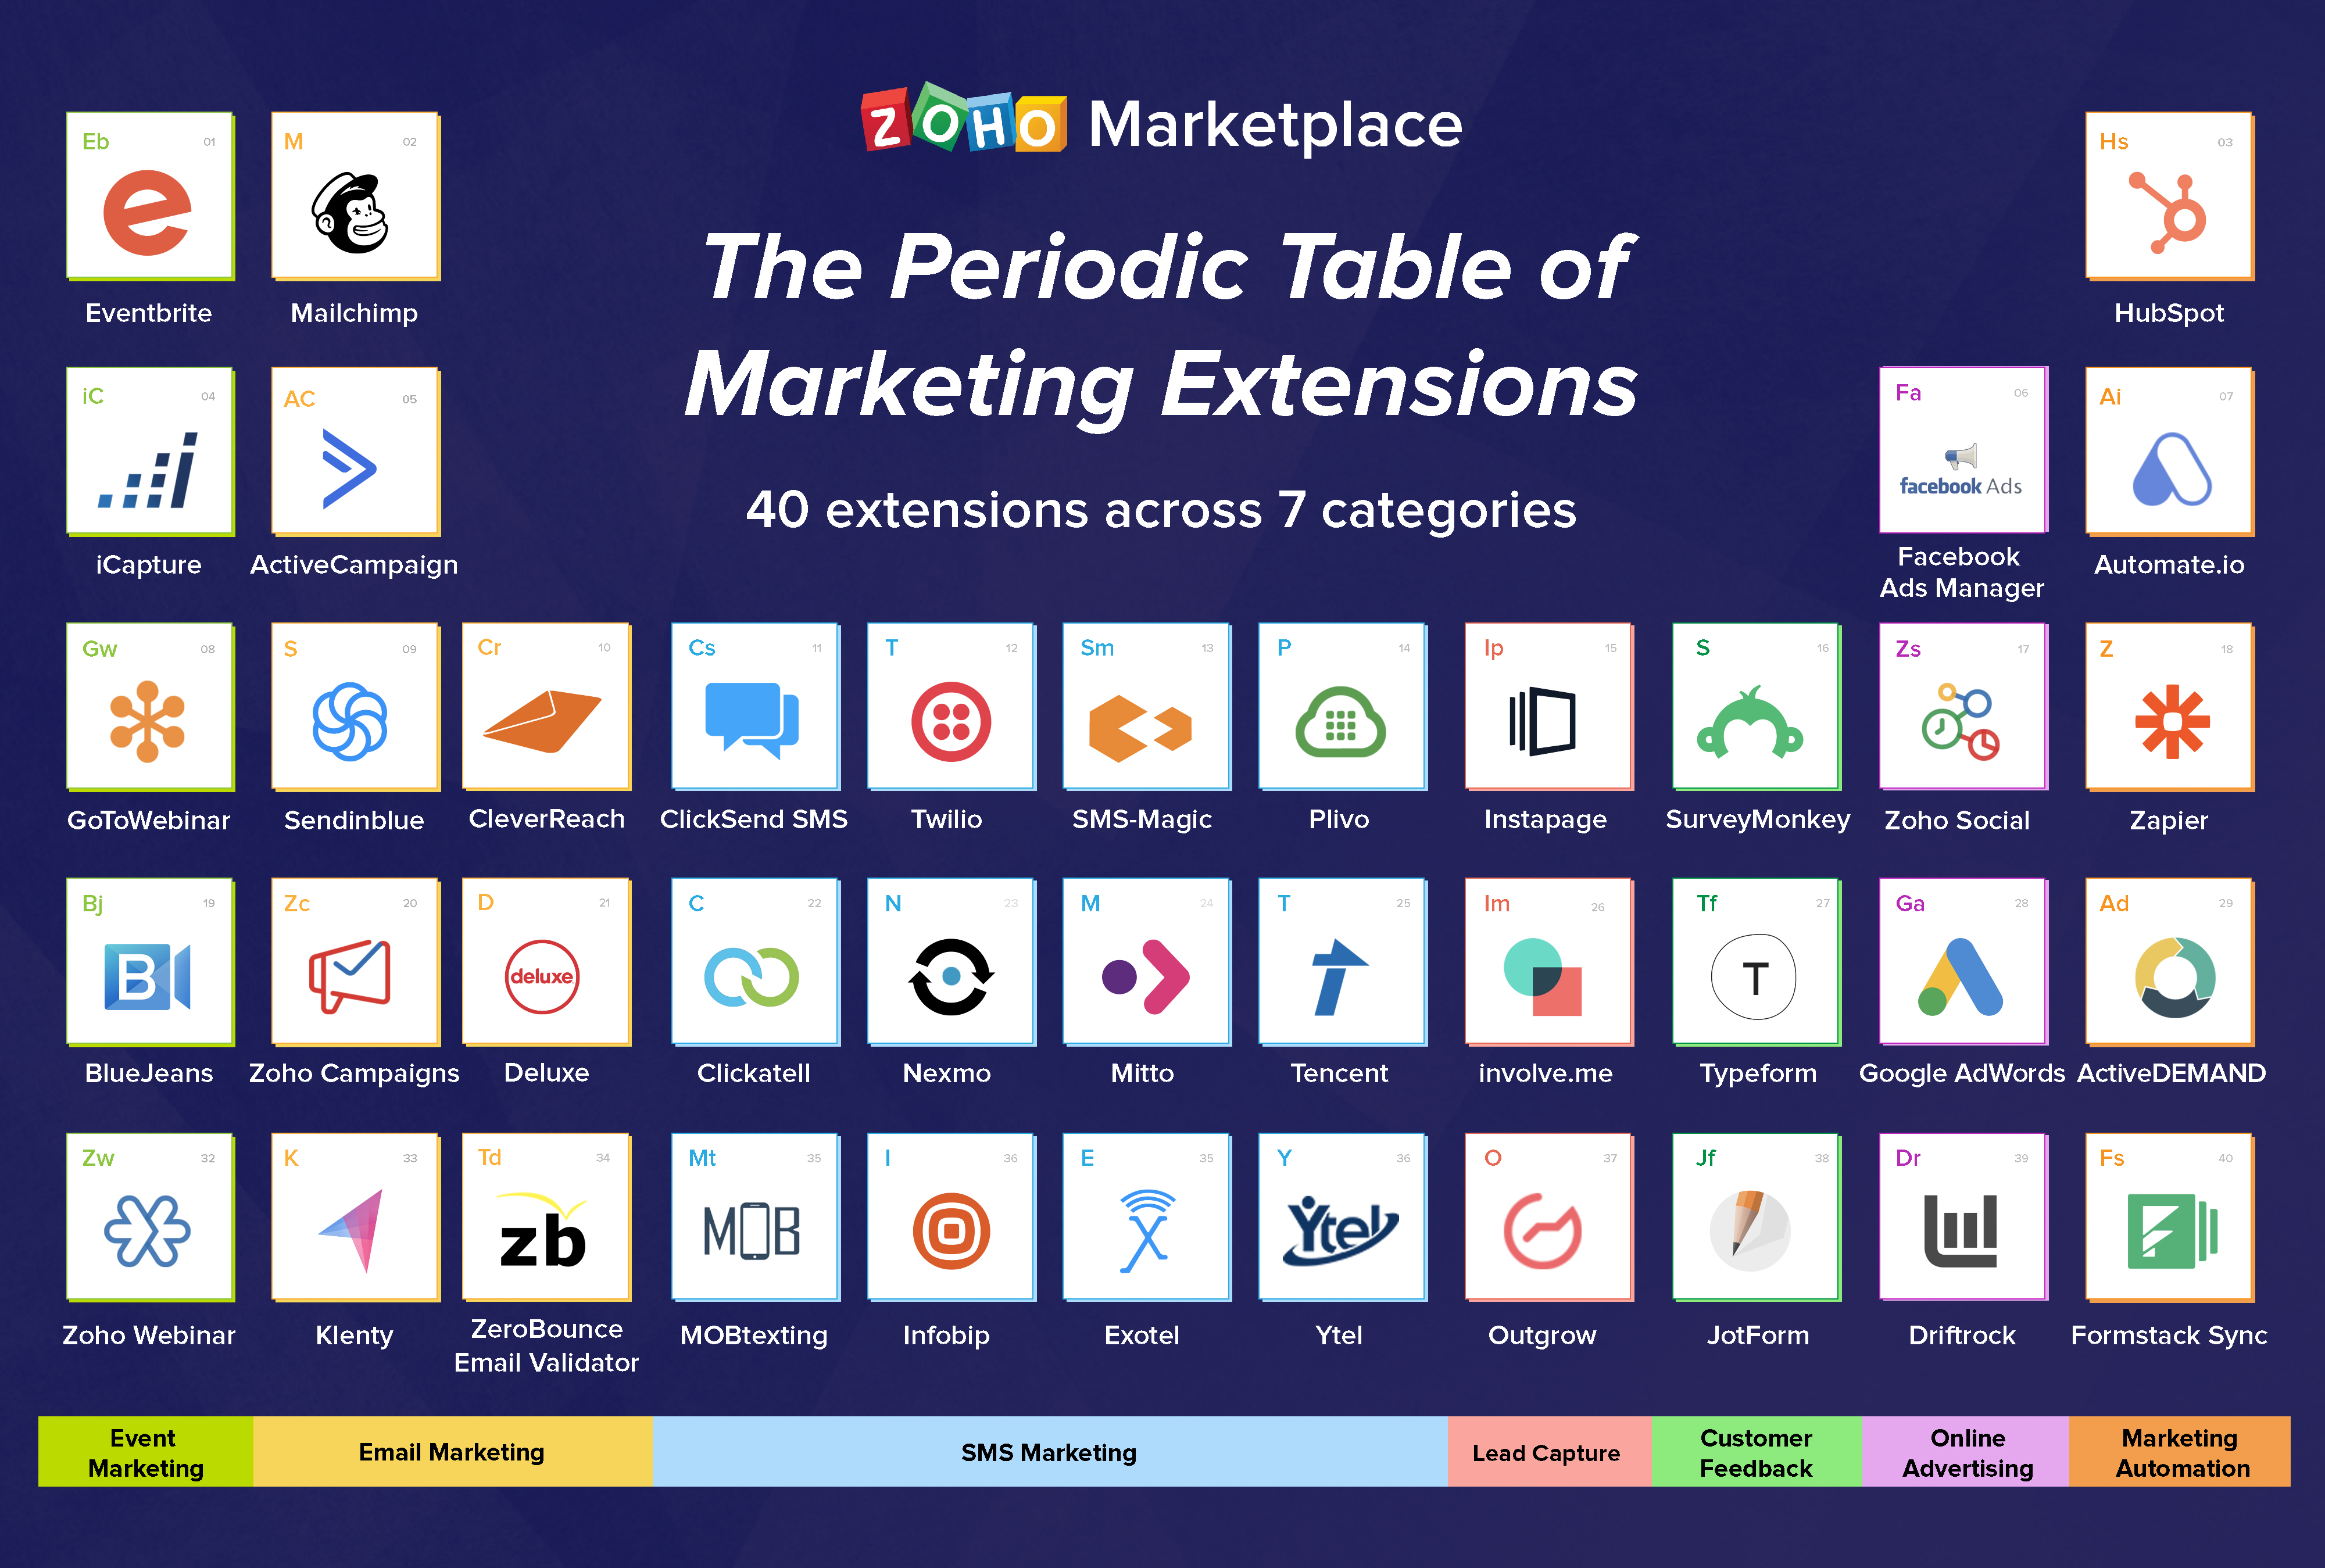 The Periodic Table of Marketing Extensions